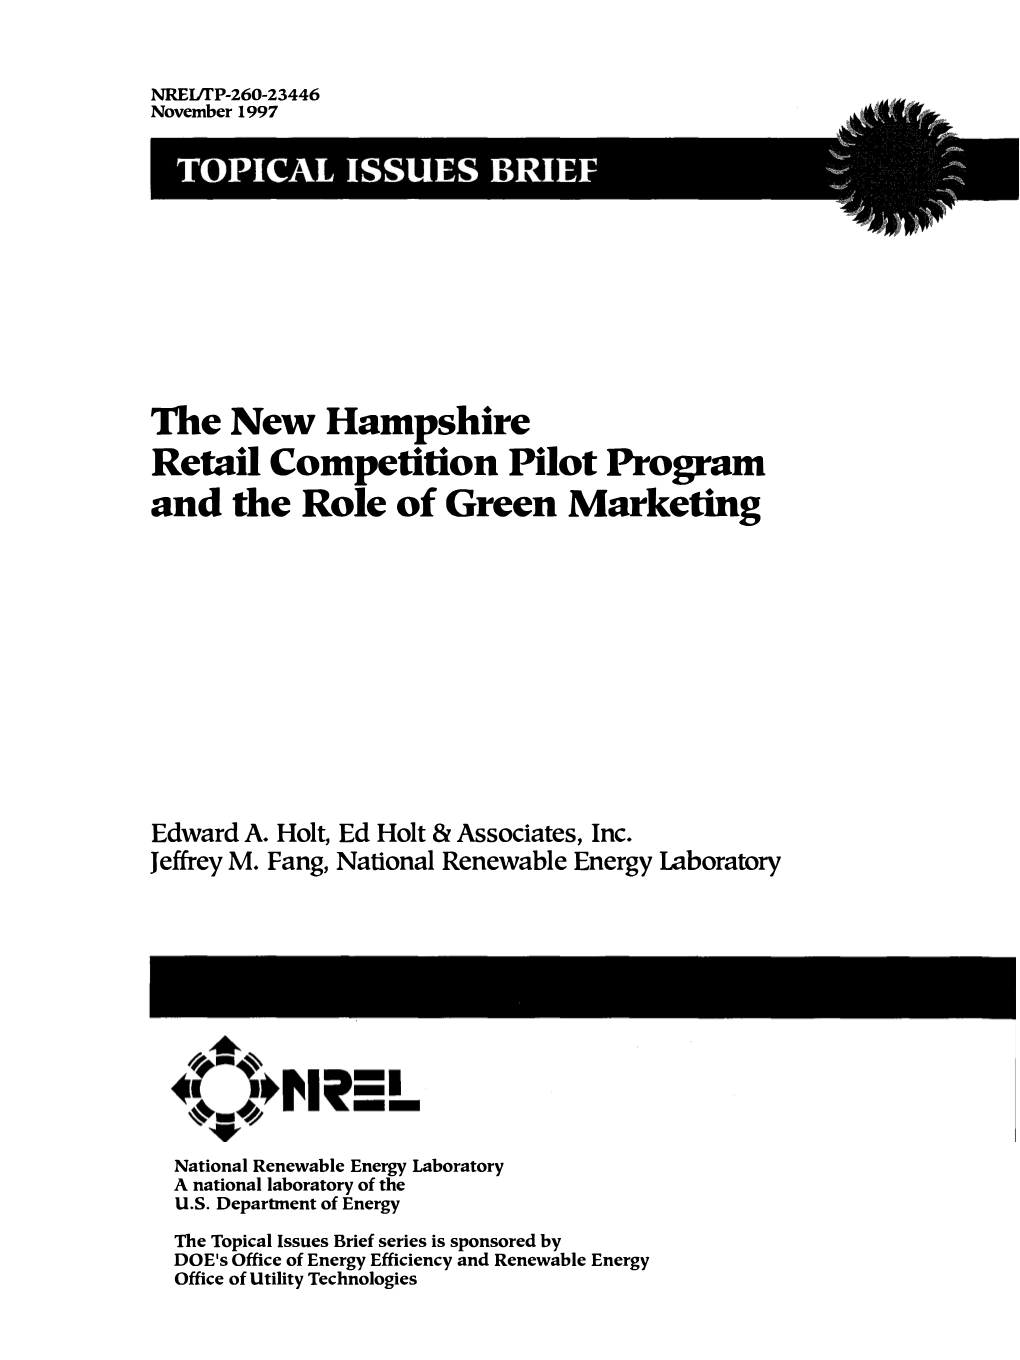 The New Hampshire Retail Competition Pilot Program and the Role of Green Marketing